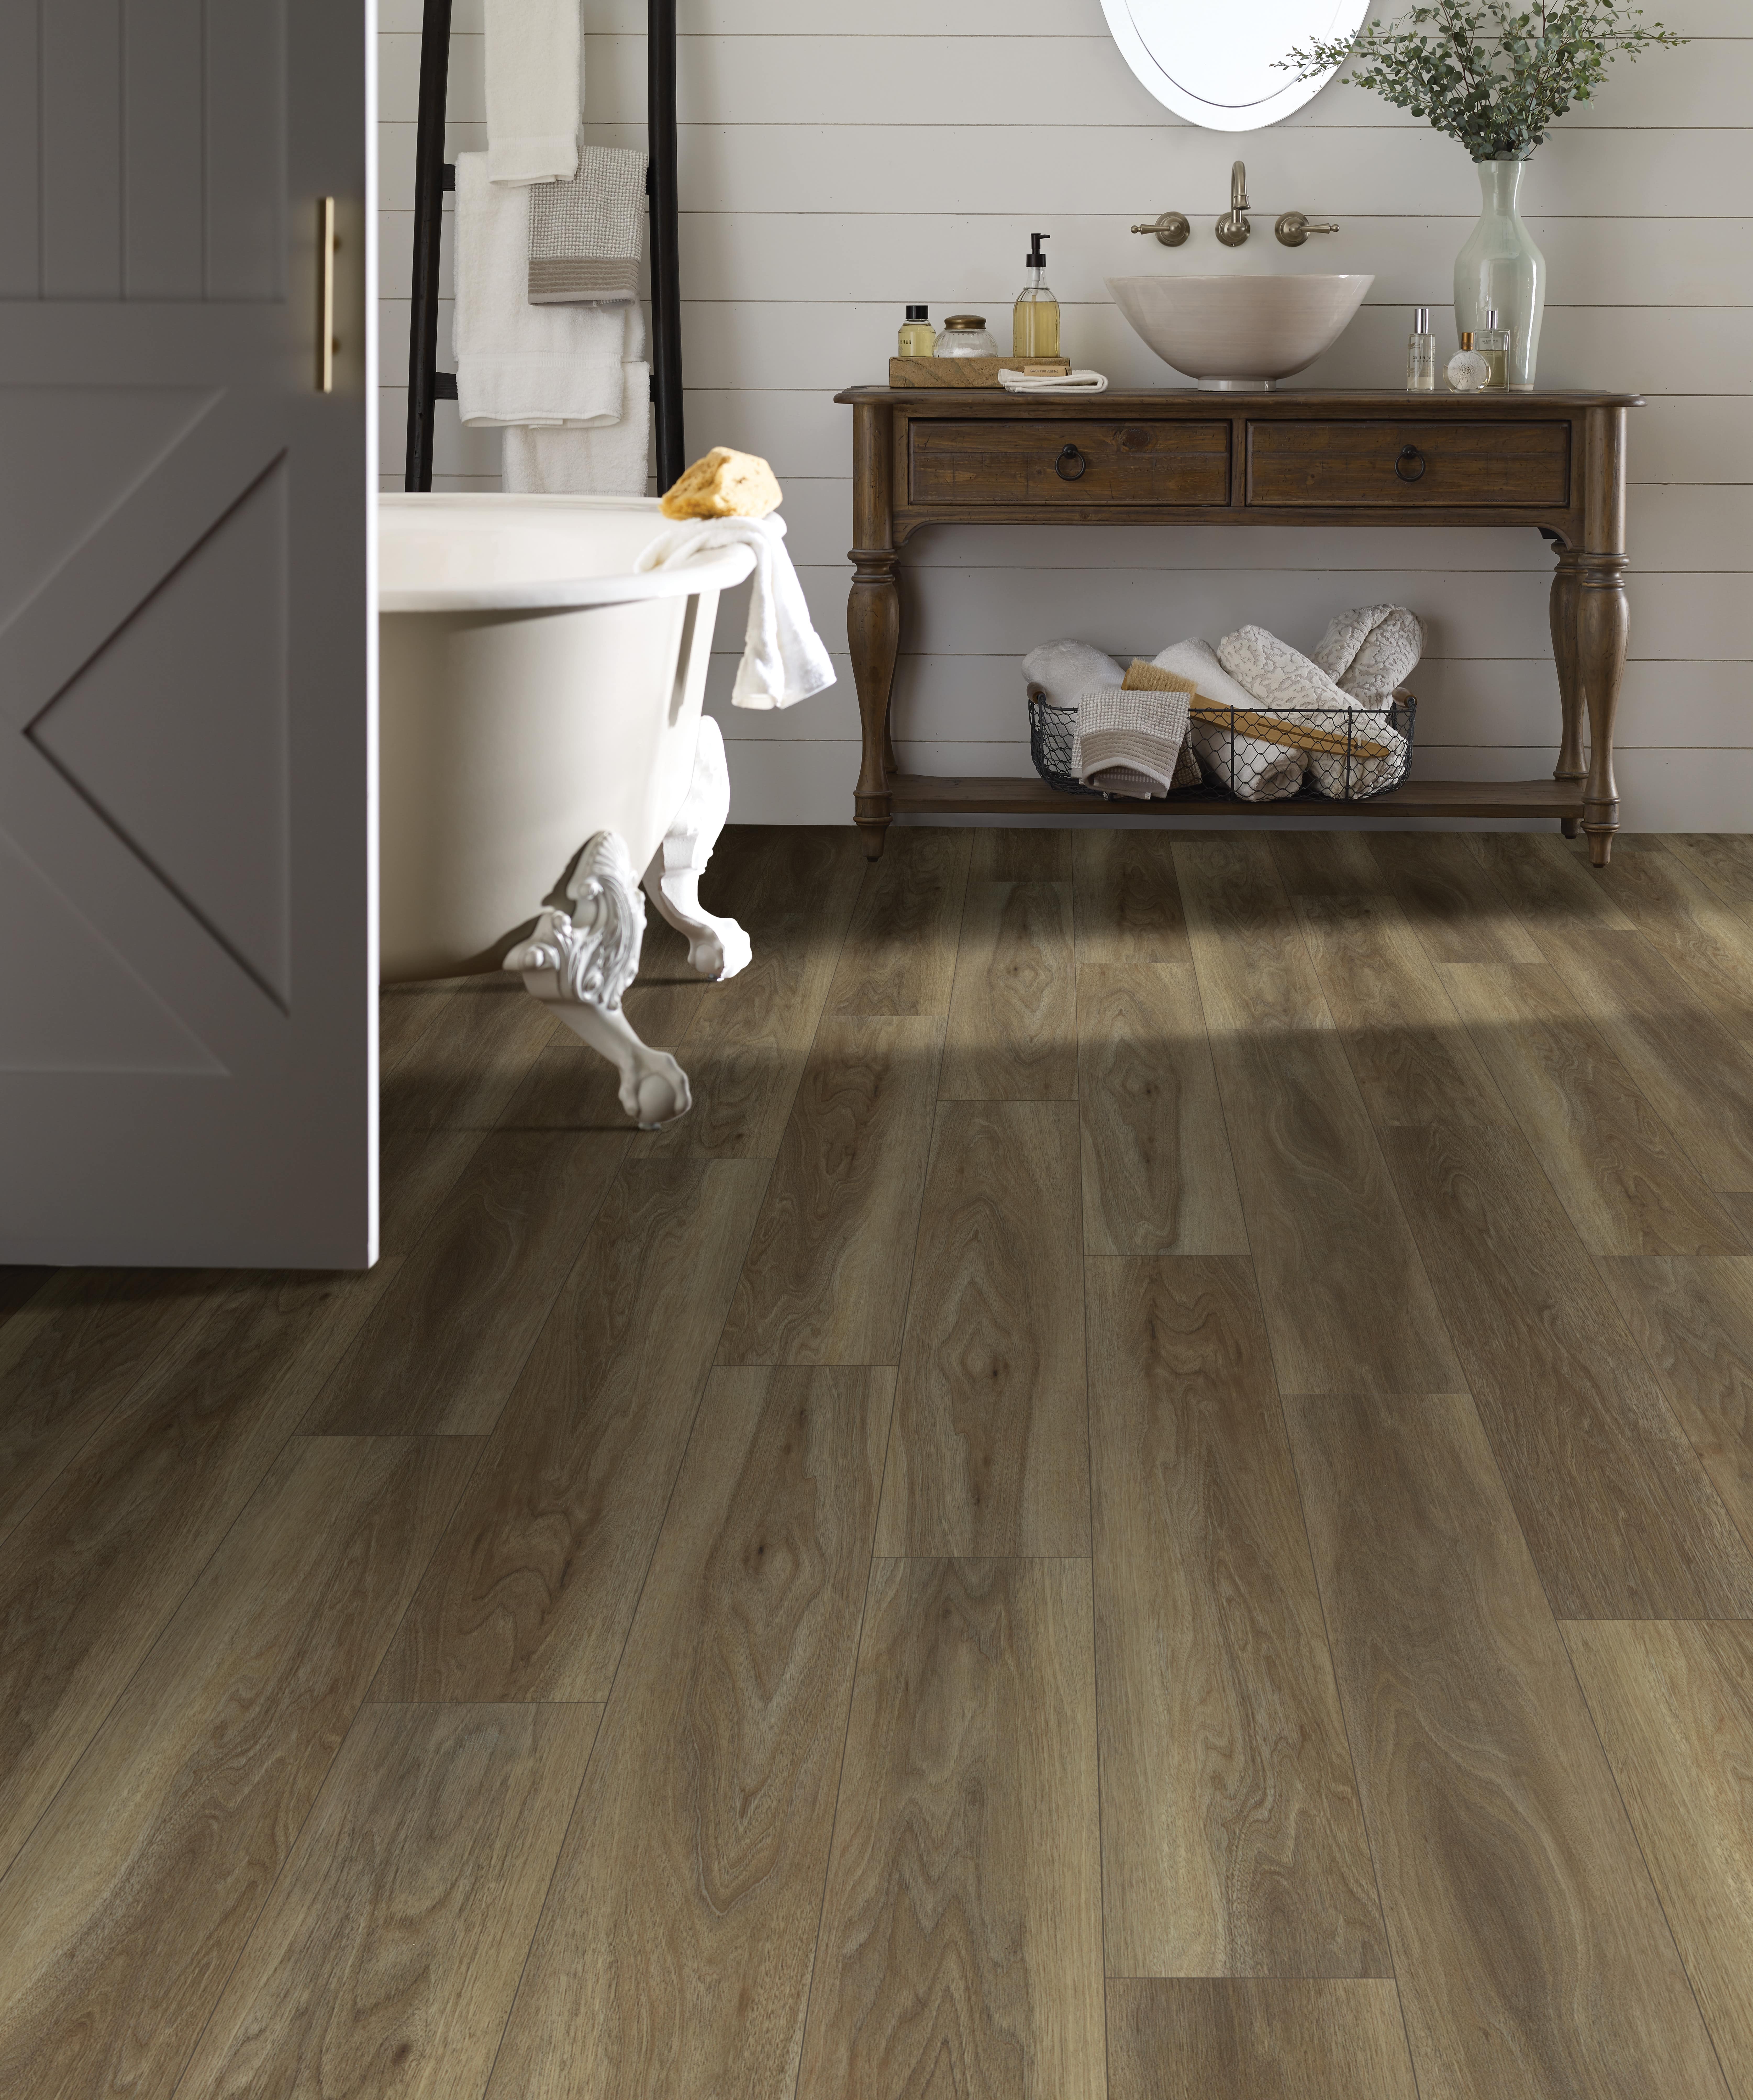 Wood Floor Bathrooms How To Do Them, How To Install Laminate Flooring In Bathroom